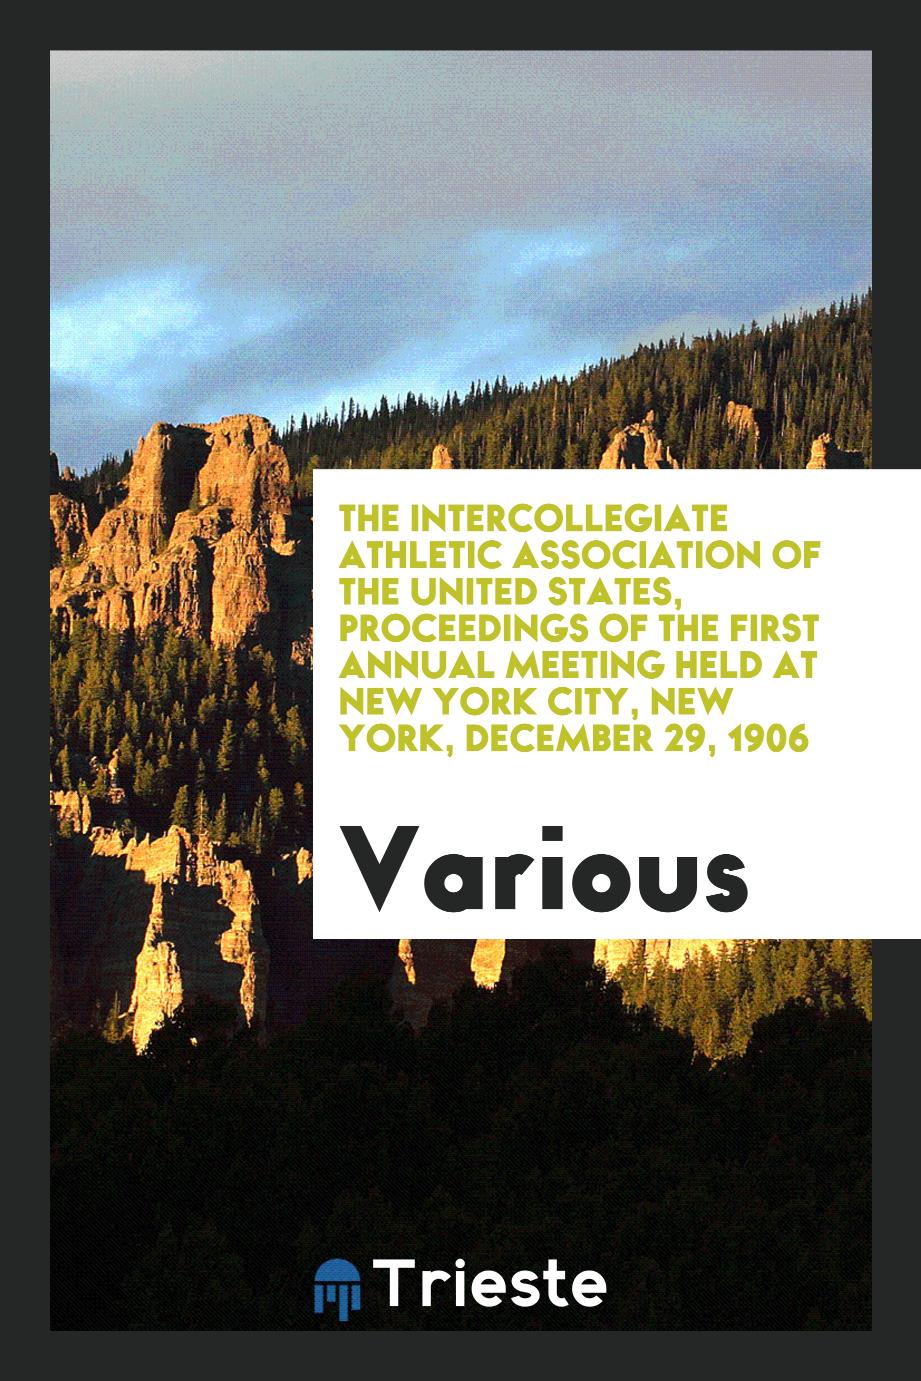 The Intercollegiate Athletic Association of the United States, proceedings of the first annual meeting held at New York City, New York, December 29, 1906